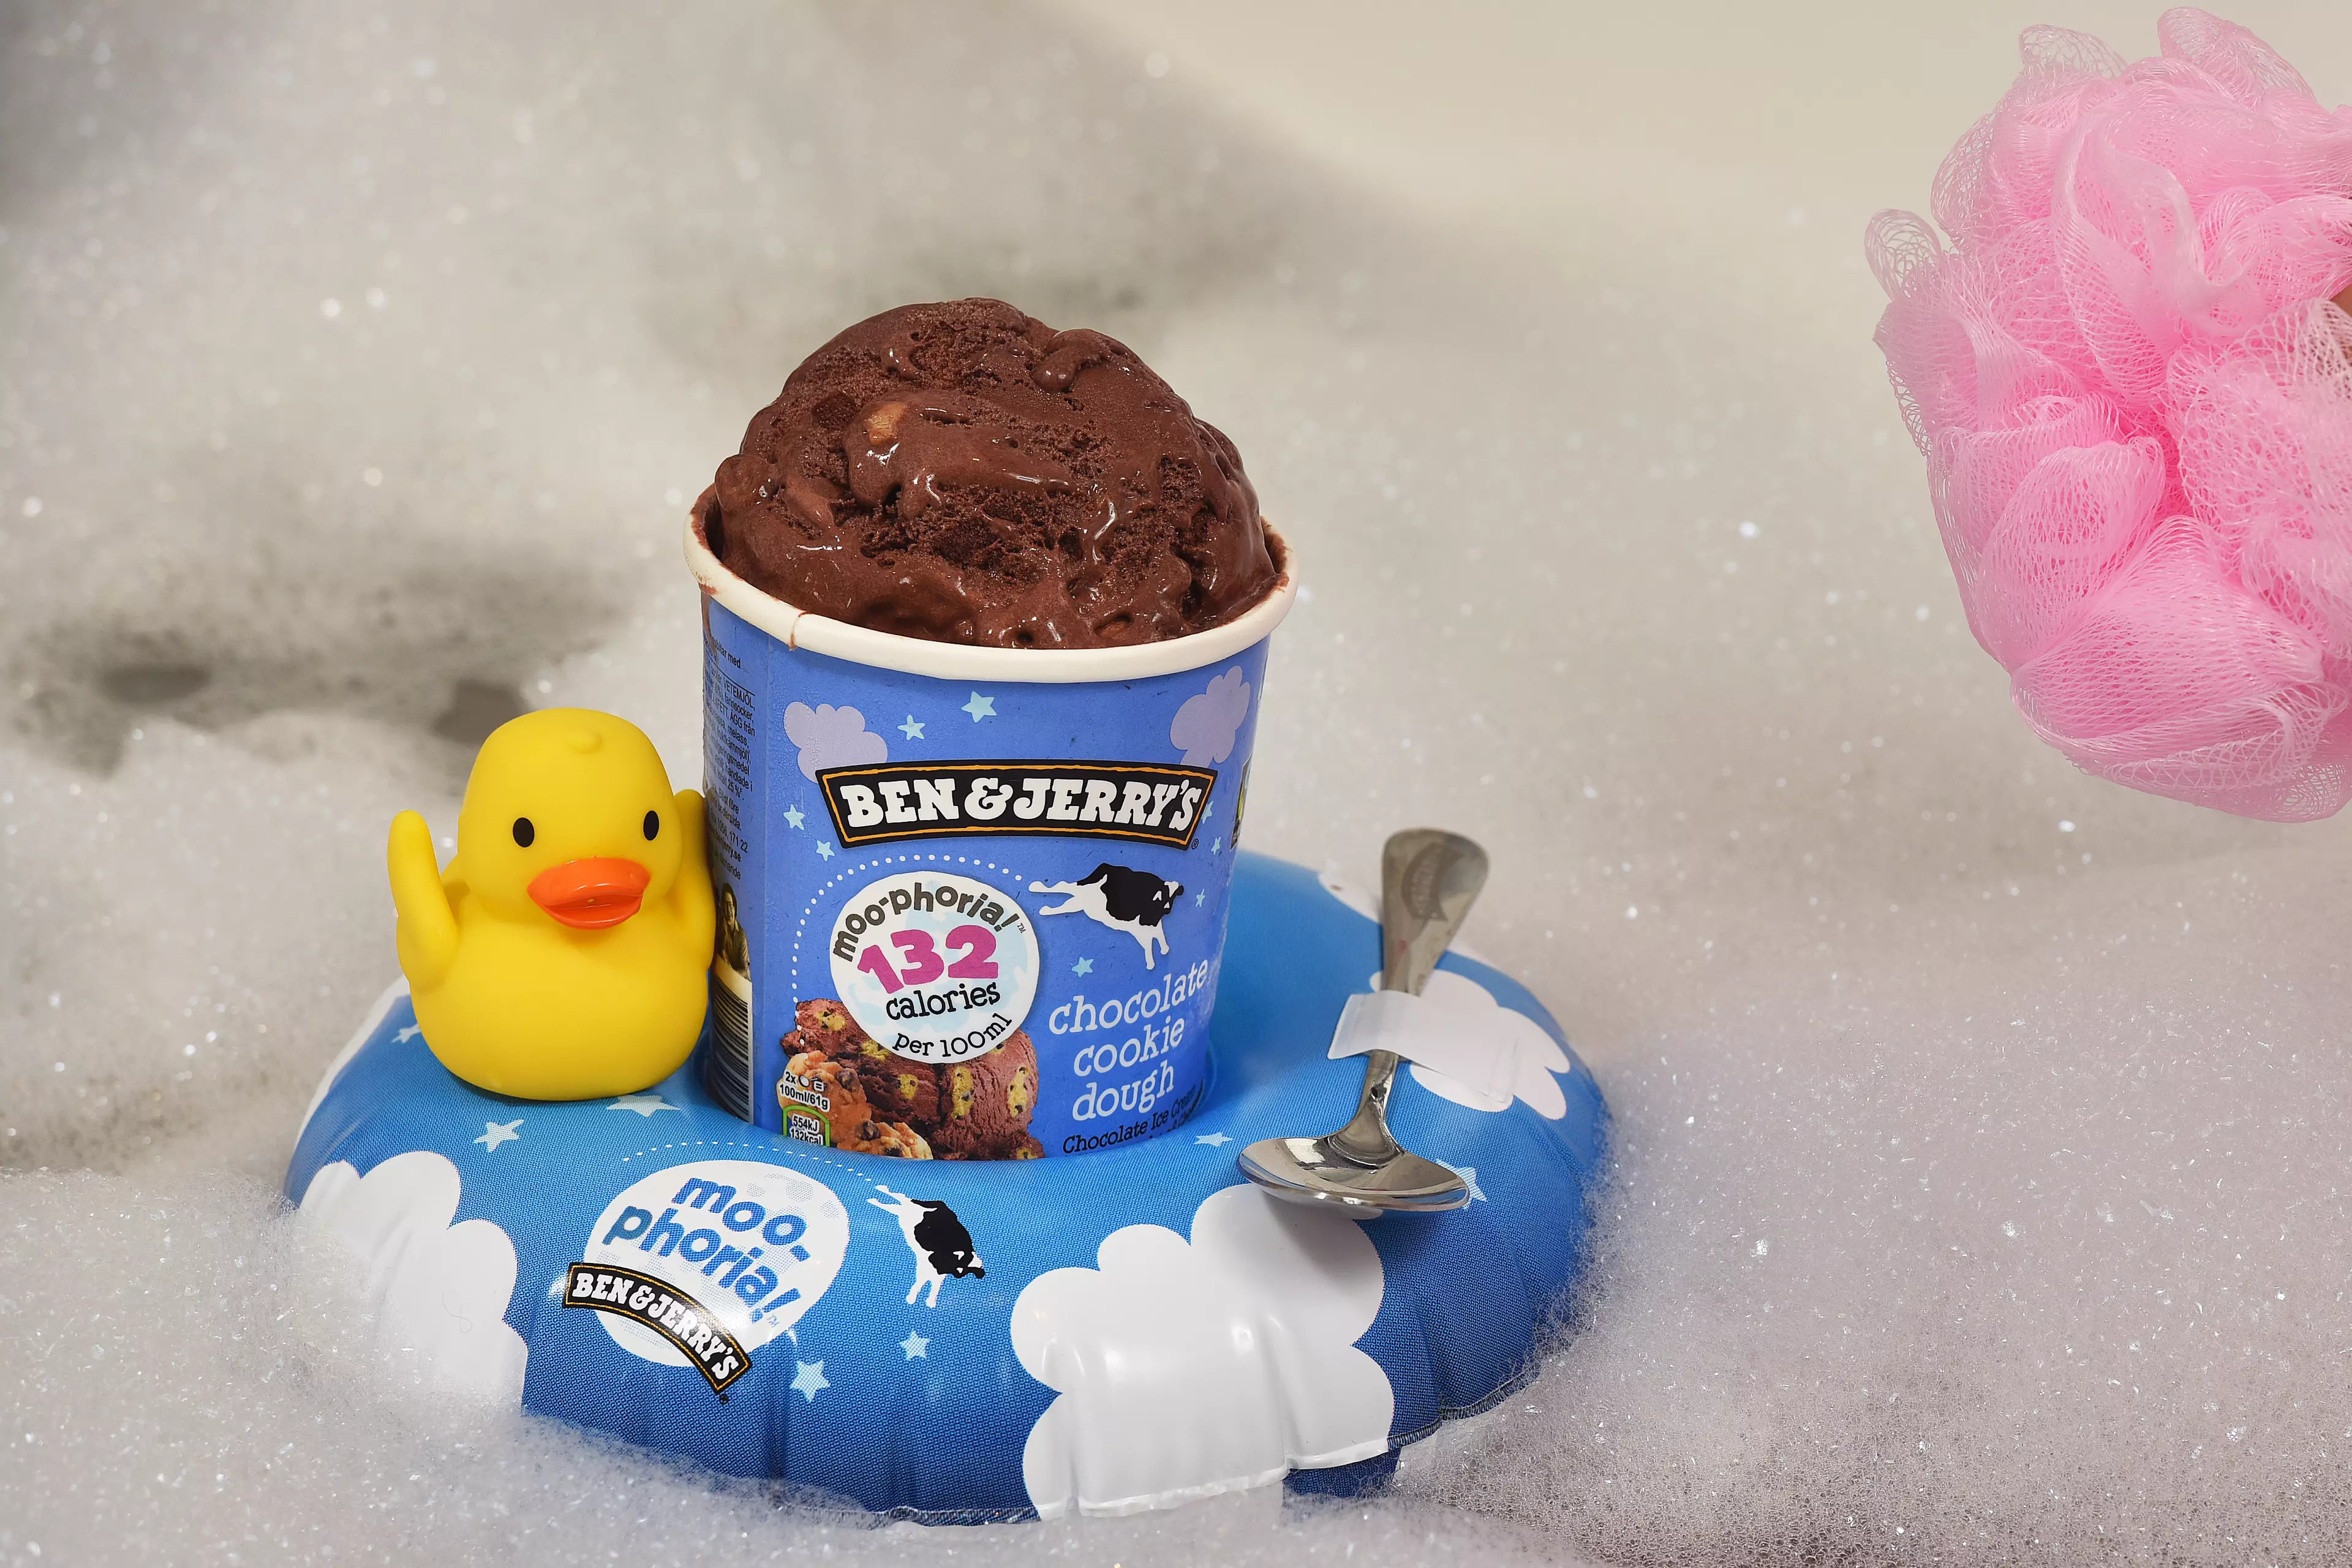 You can now eat ice cream in the bath (